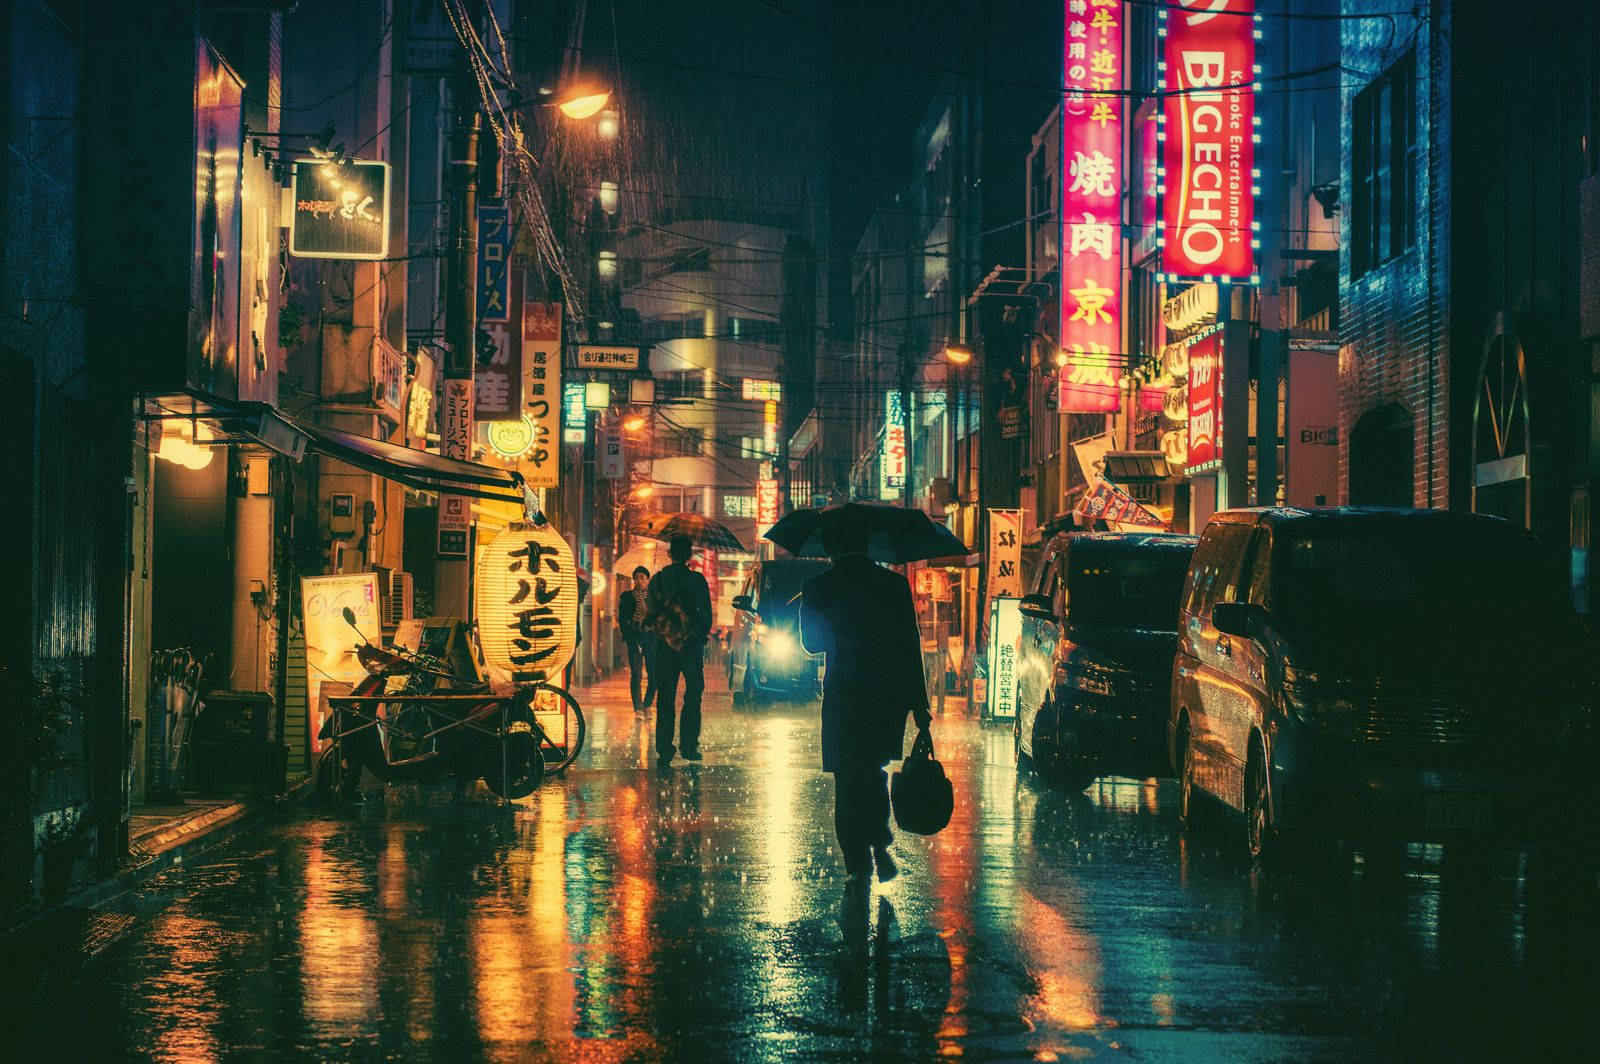 Night time in Tokyo, illuminated by neon signs on a rainy night Wallpaper